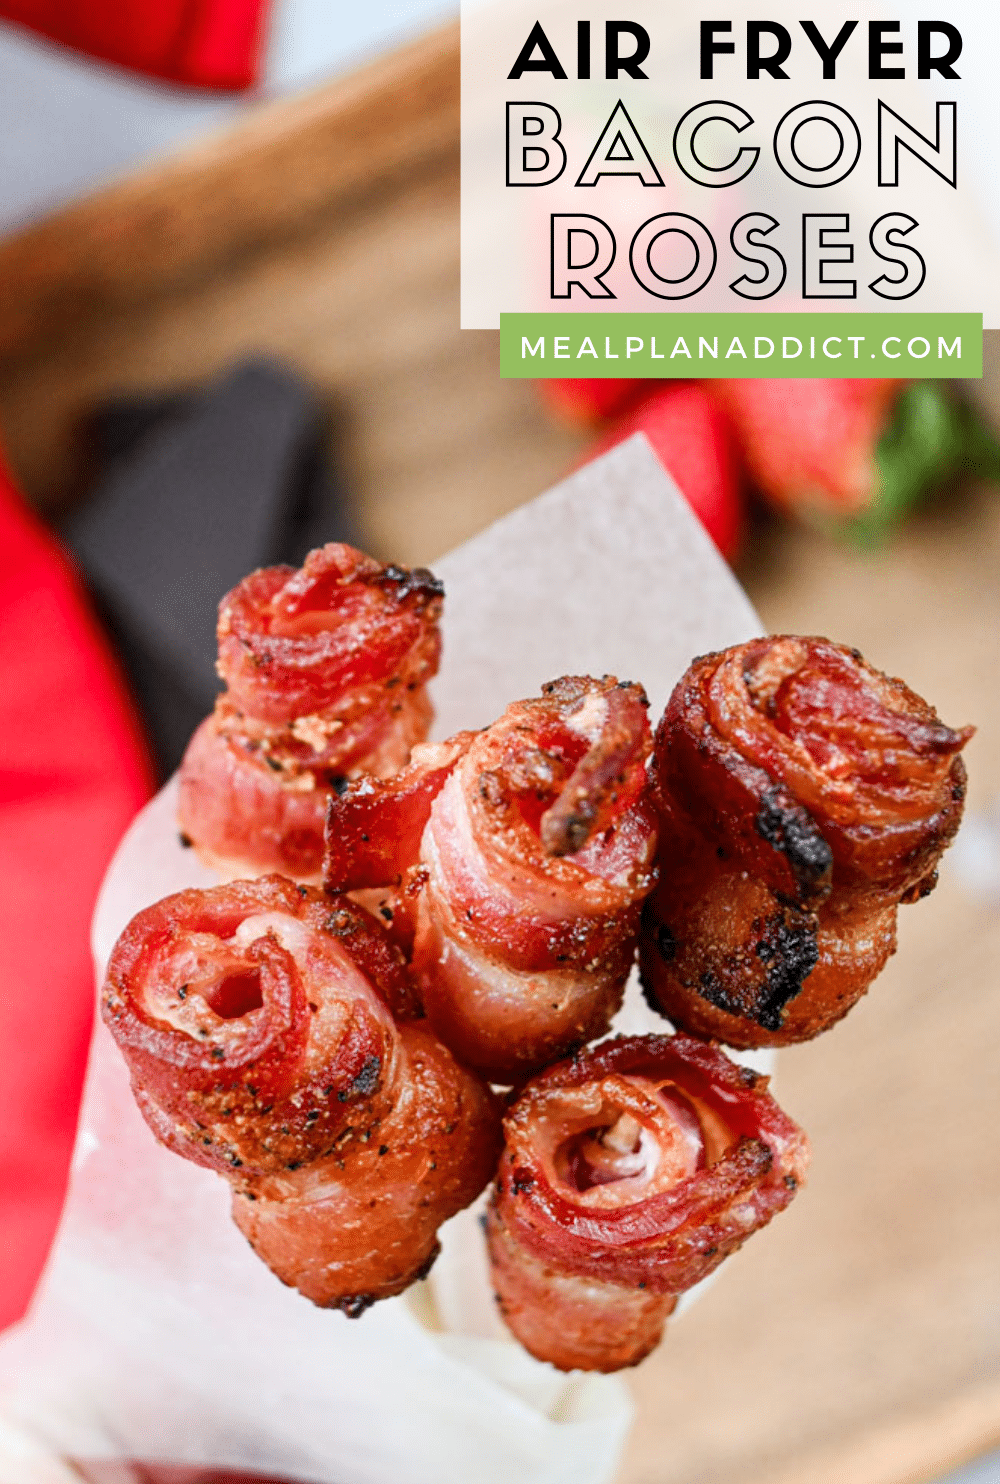 air fryer bacon roses in a bouquet image for pinterest